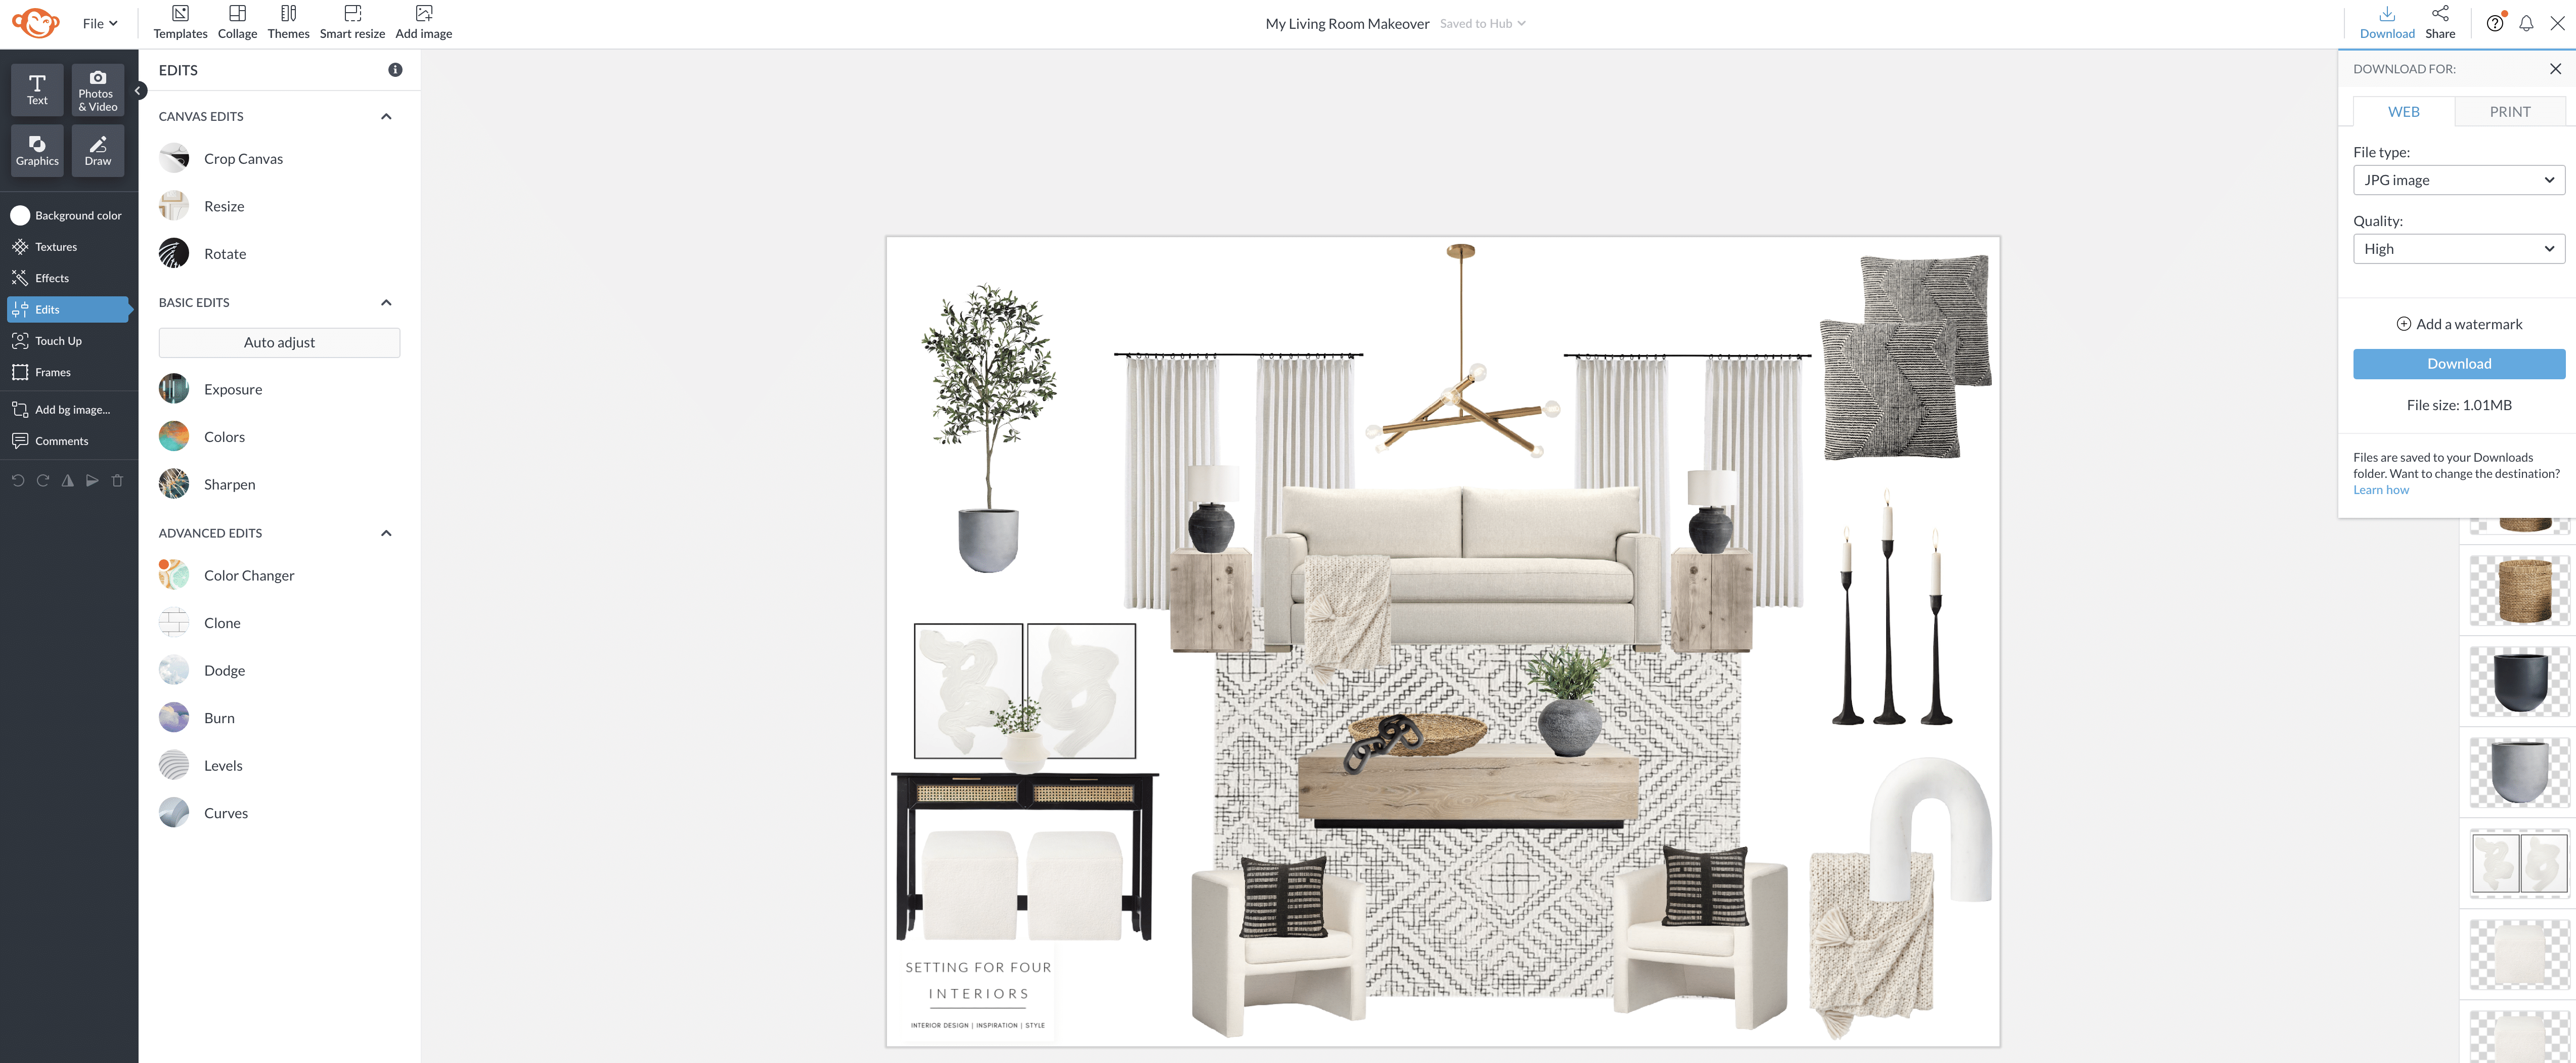 How to Make An Interior Design Moodboard